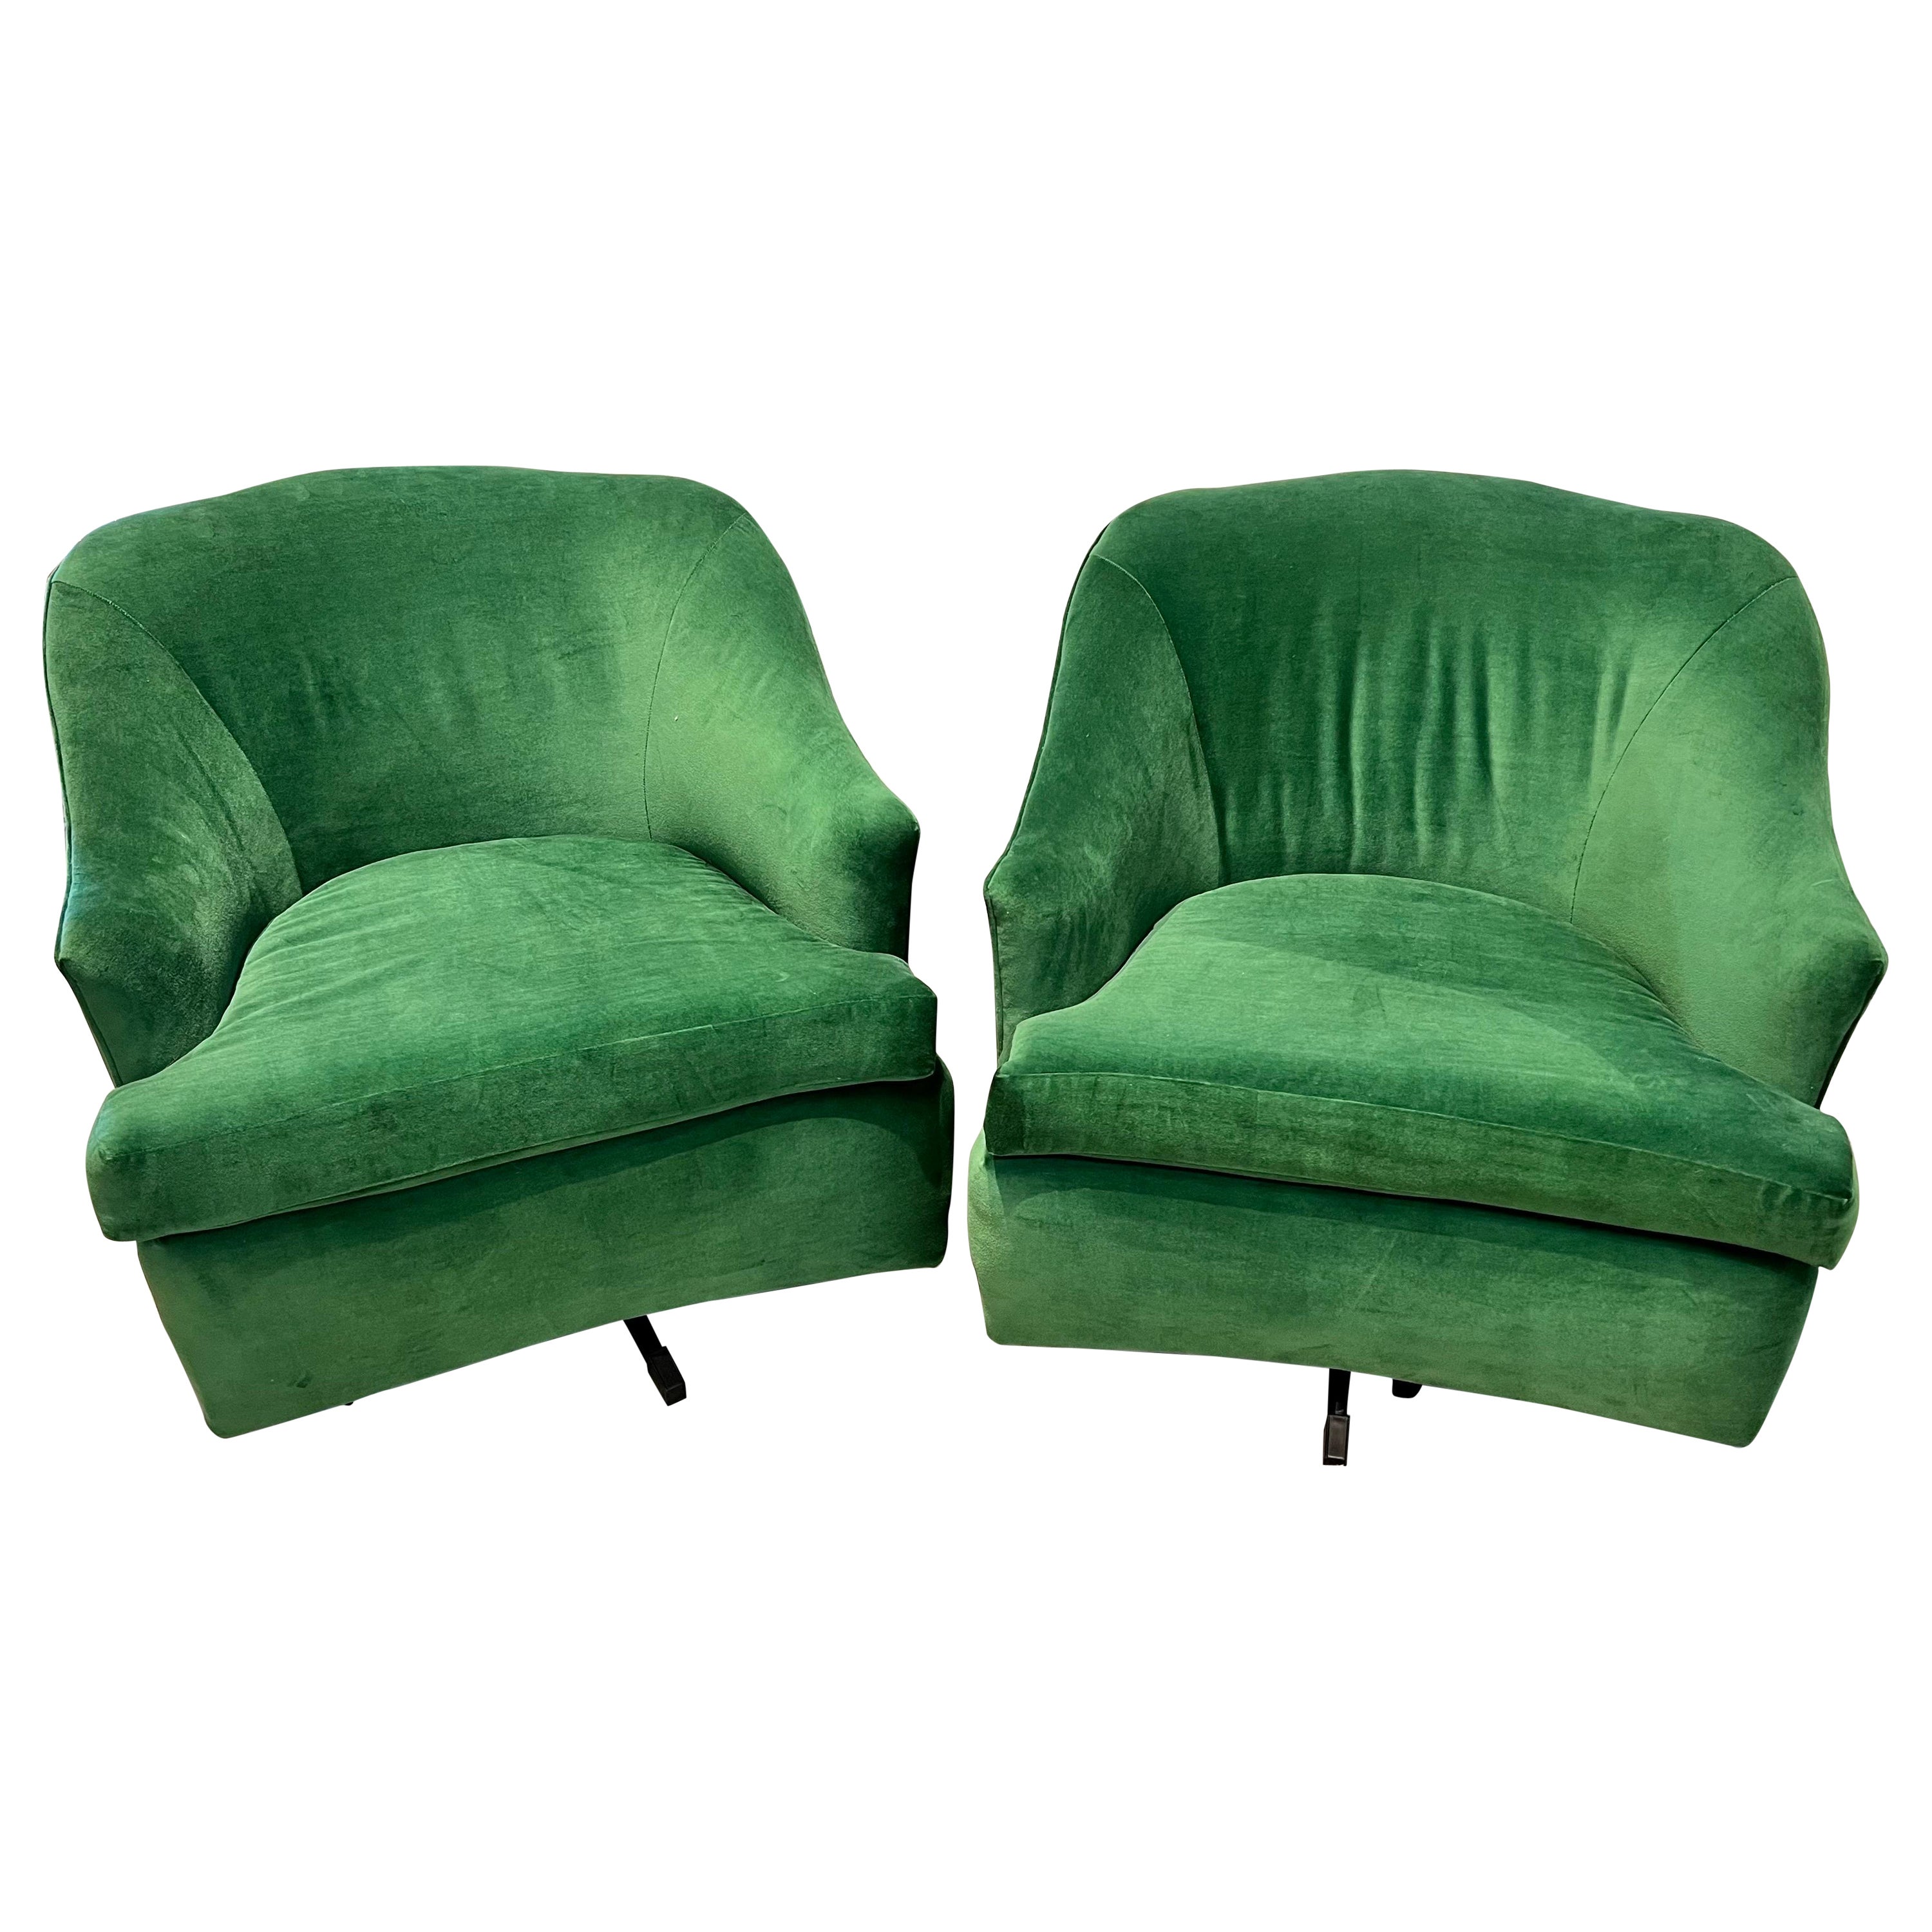 Pair of Newly Upholstered Emerald Green Velvet Swivel Club Chairs For Sale